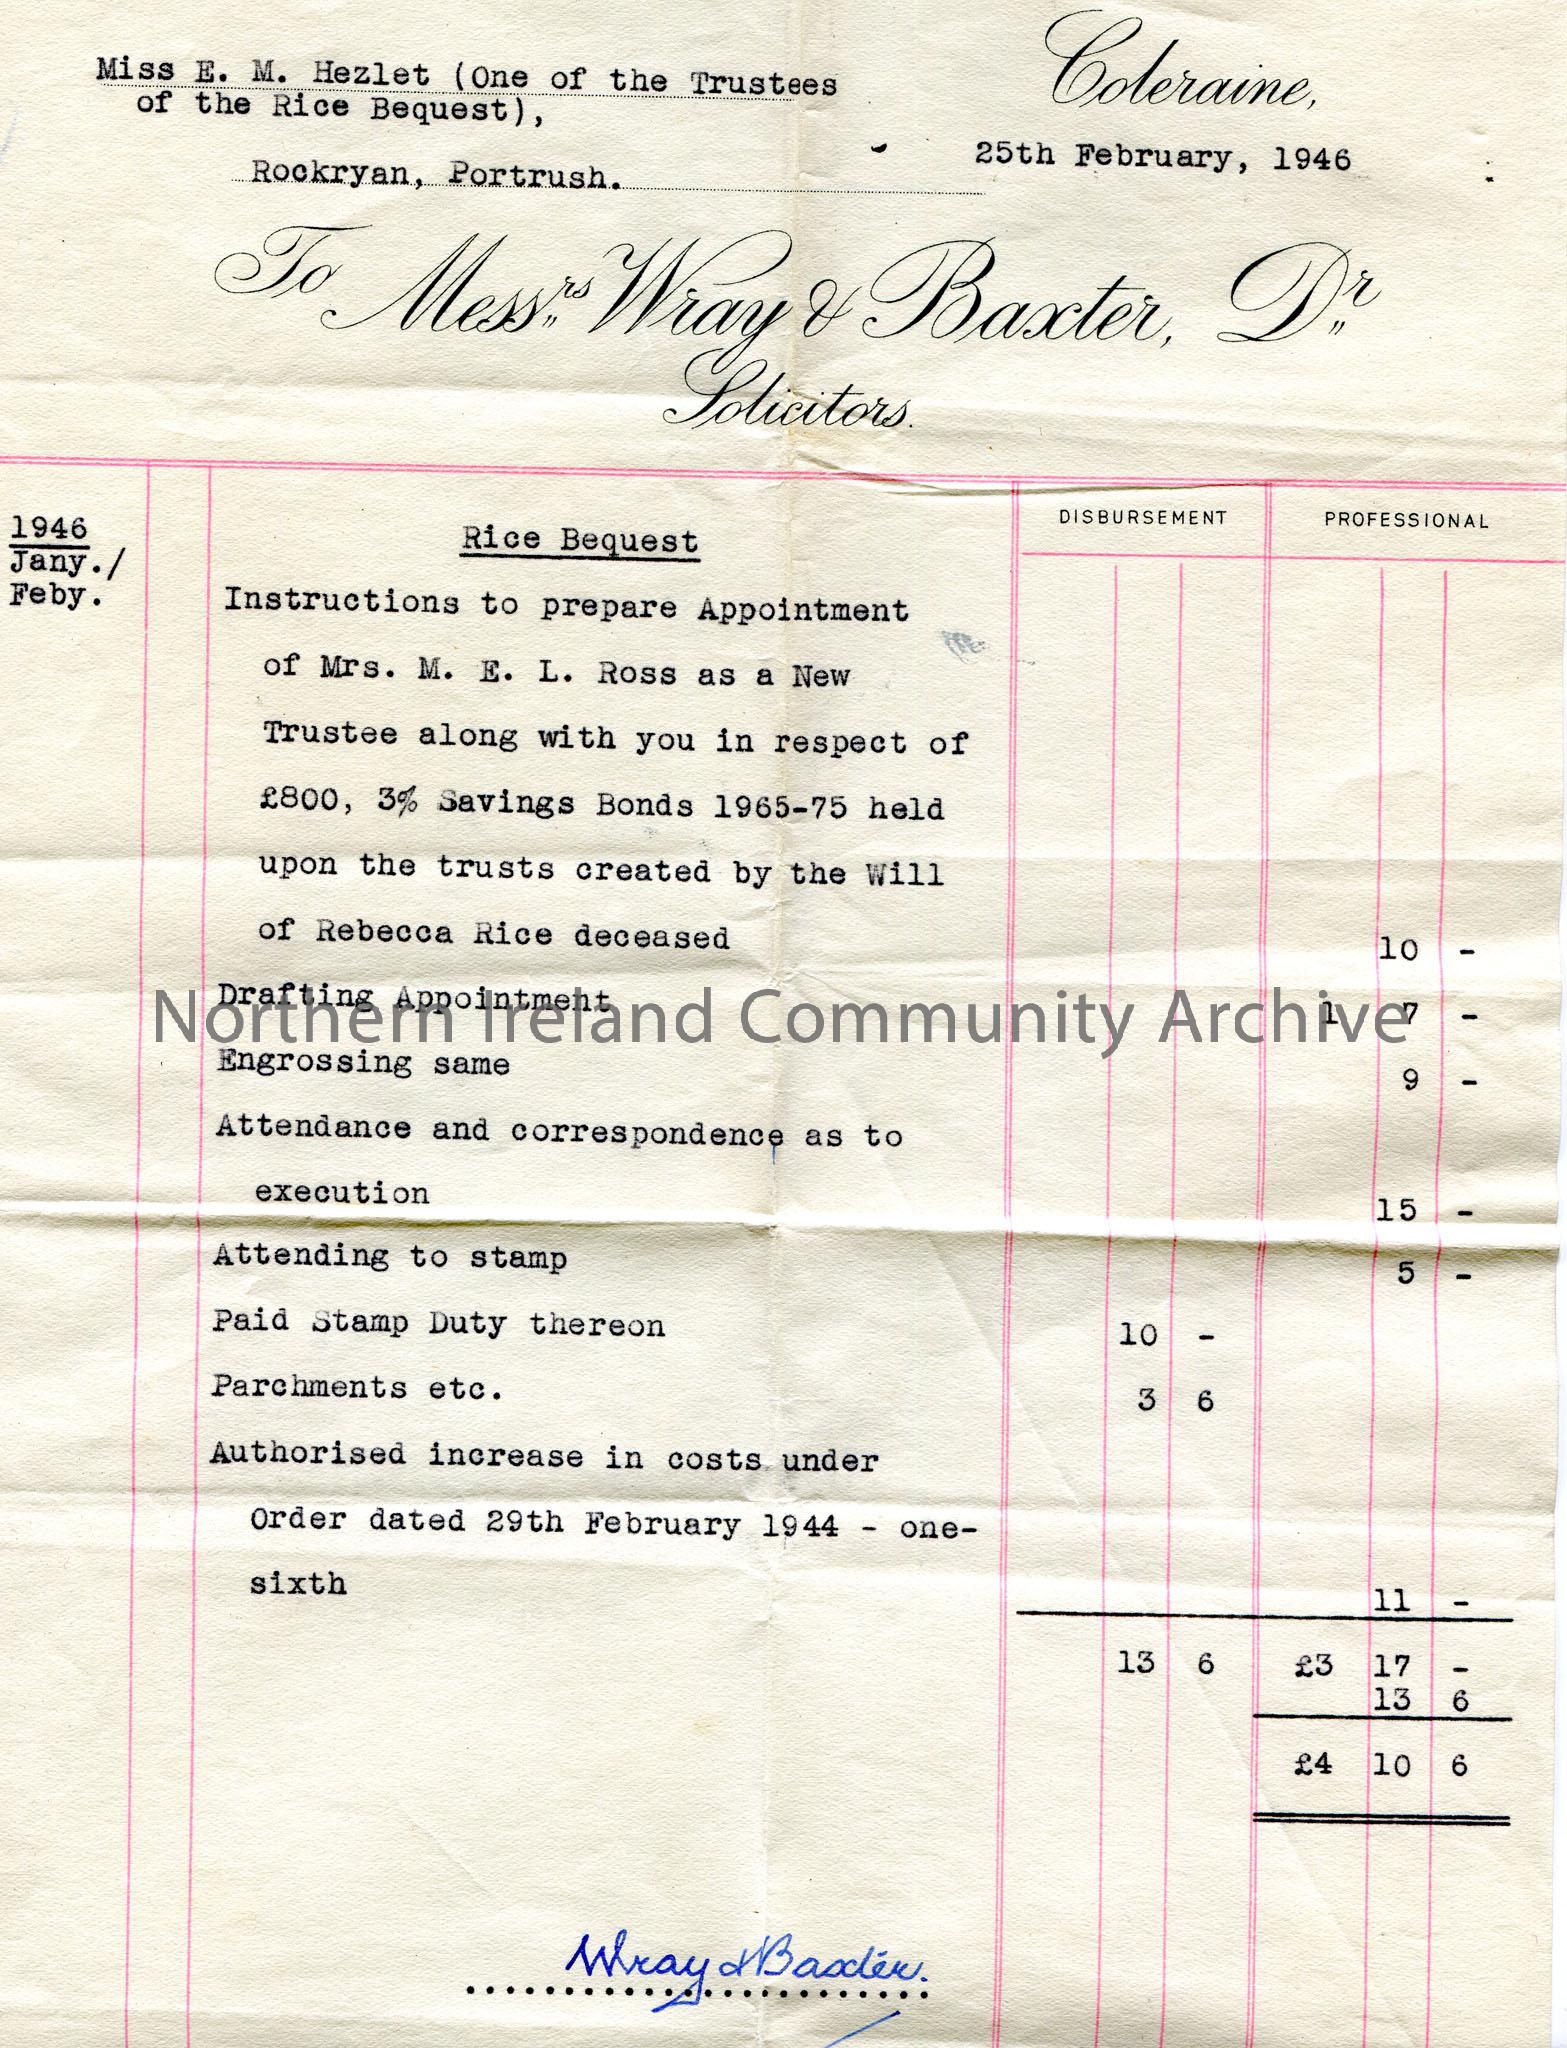 Invoice re Rice Bequest from Miss E. M. Hezlet. Dated 25th February, 1946 to Wray and Baxter Solicitors. ‘Cheque enclosed. Please send receipt’ handwr…